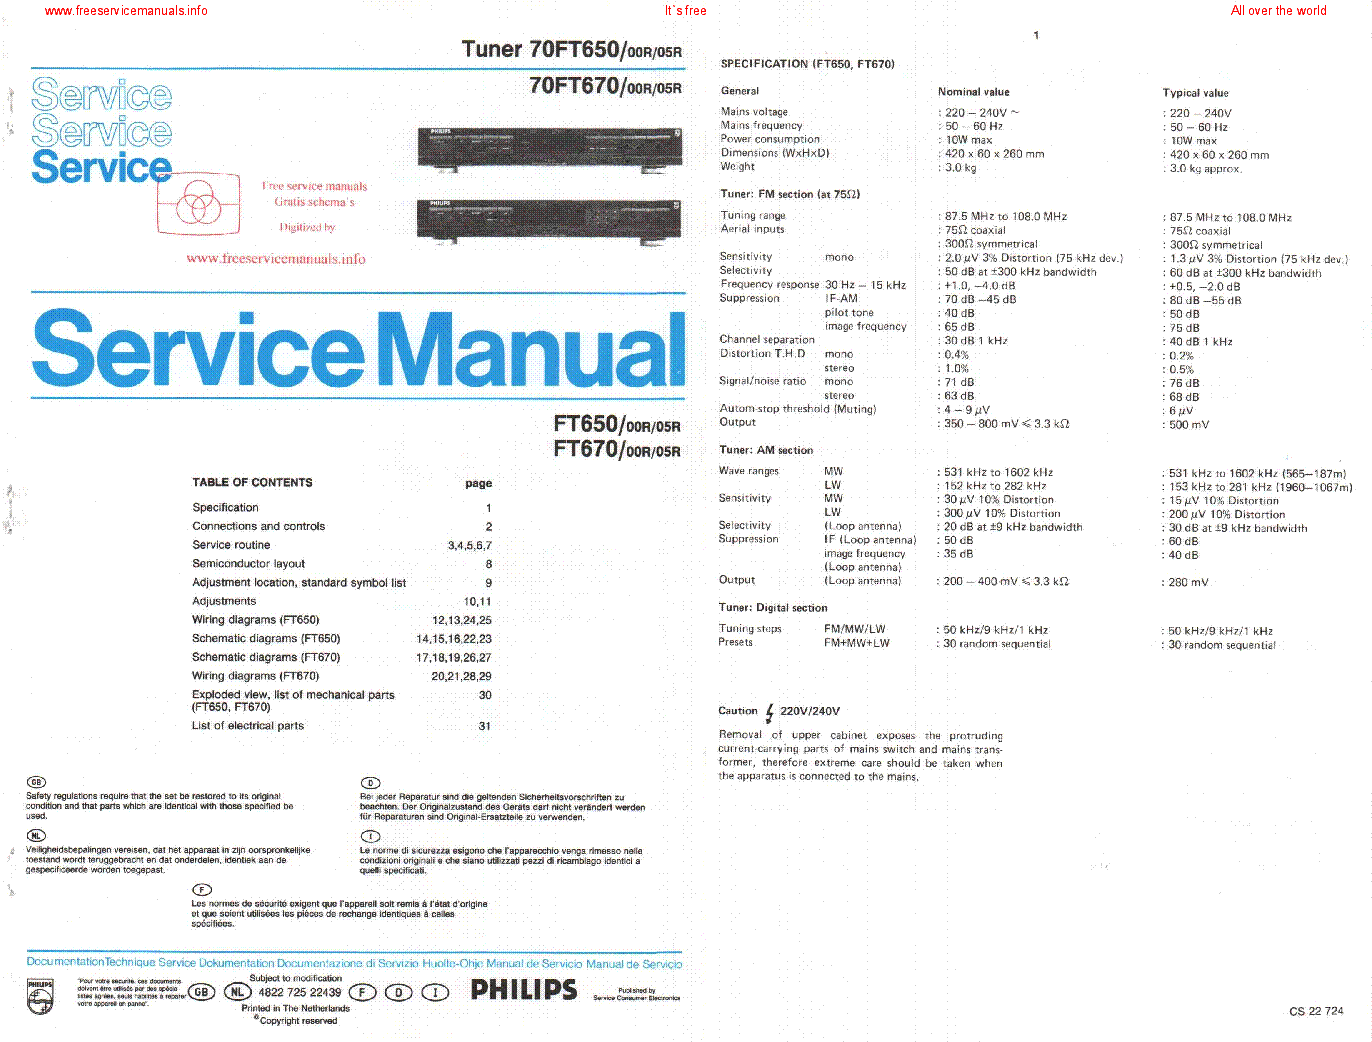 PHILIPS 70FT650 70FT670 SM service manual (1st page)